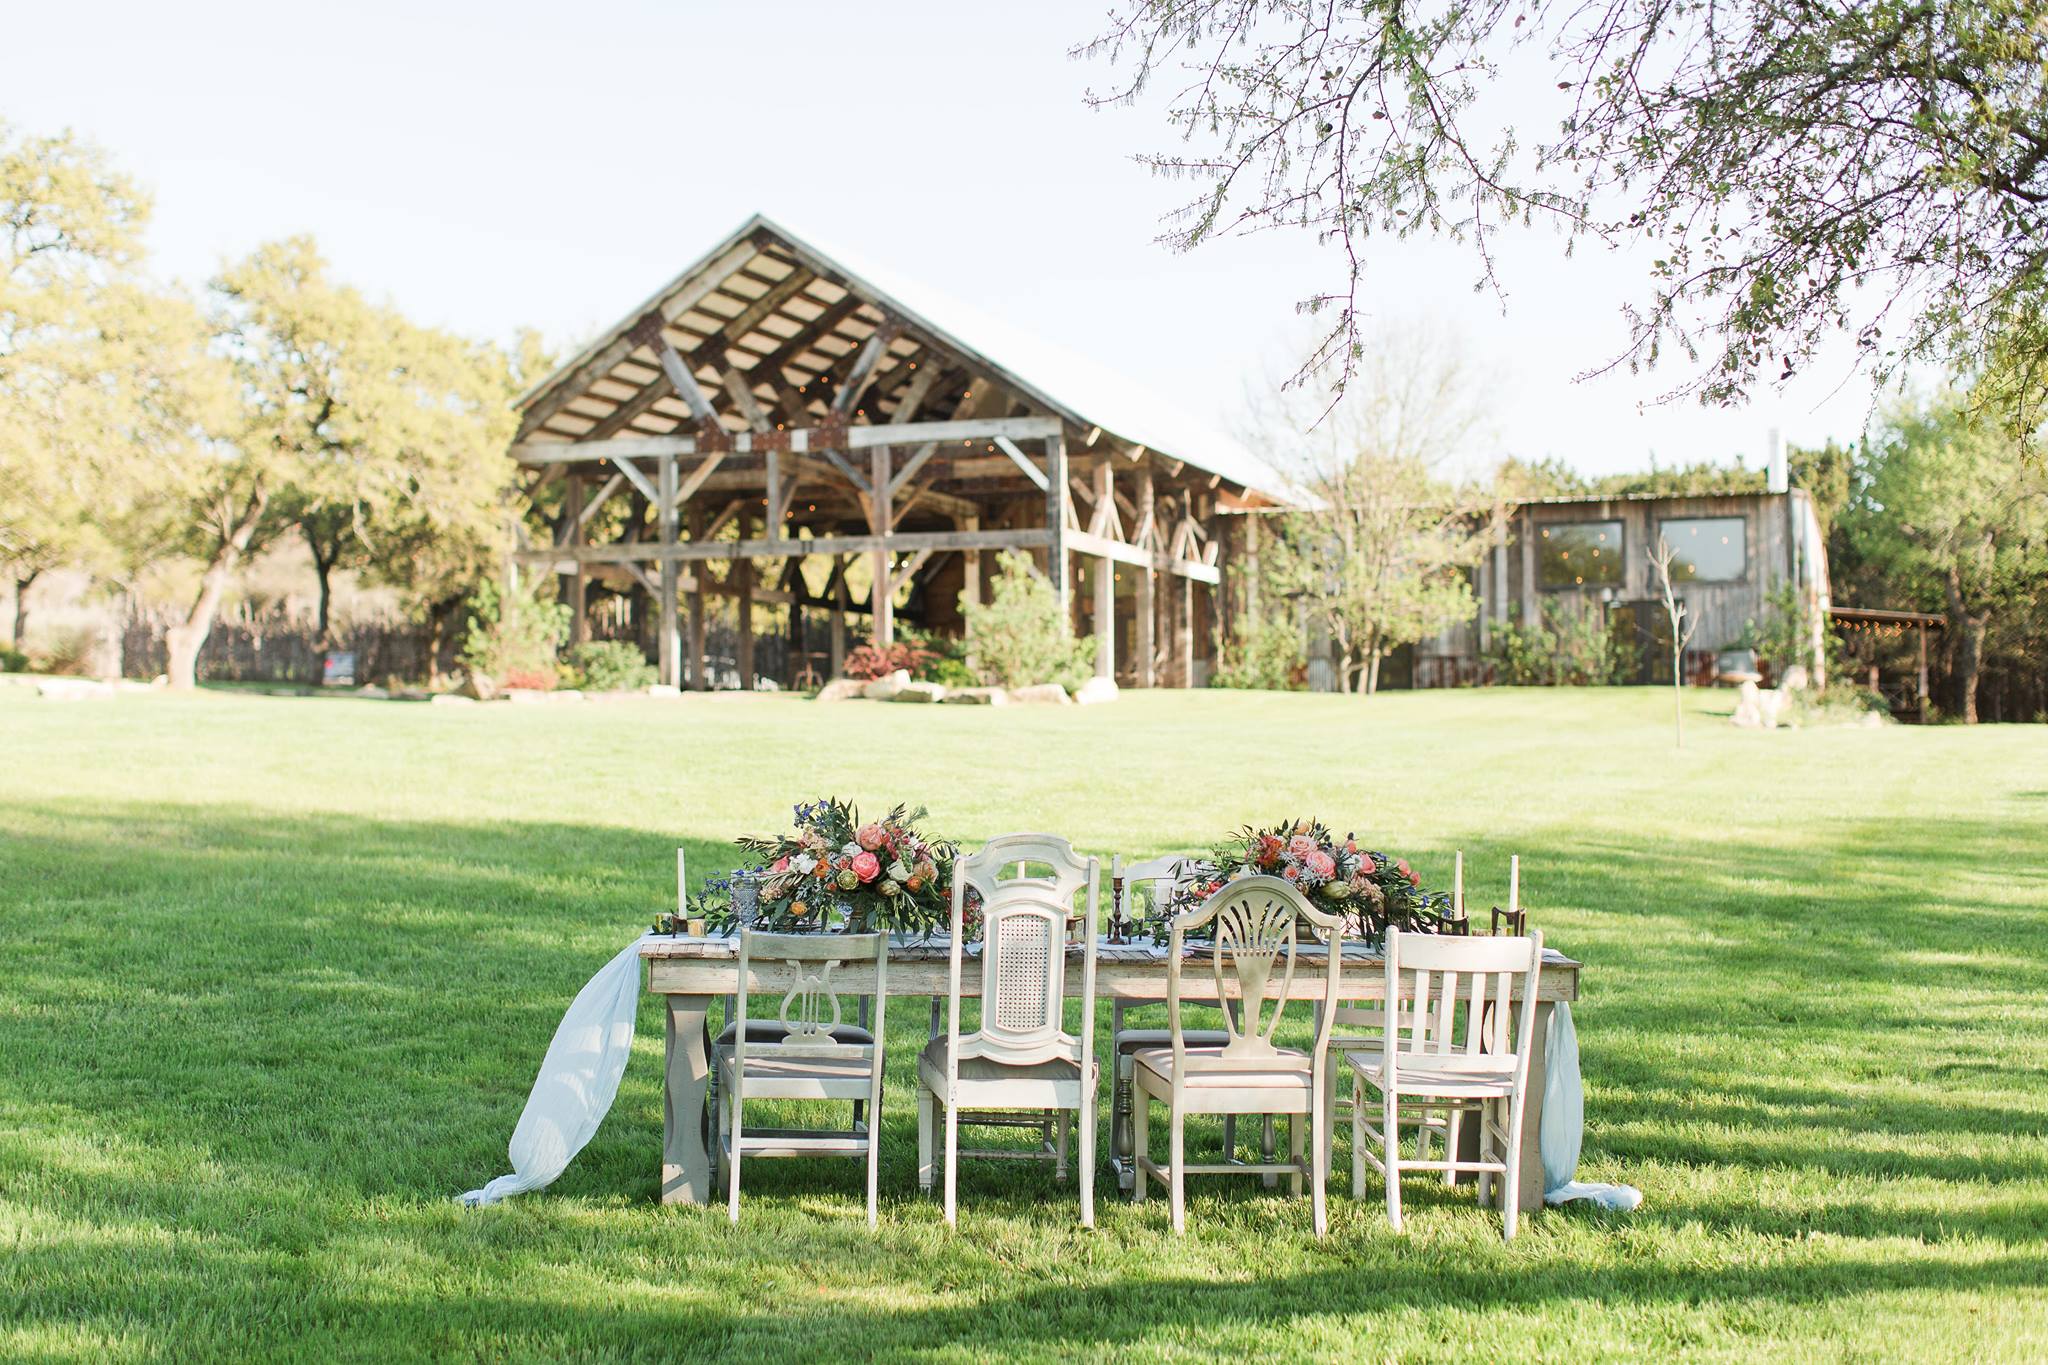 Austin Area Wedding Venue With Lodging, Wedding Venues With Fire Pits